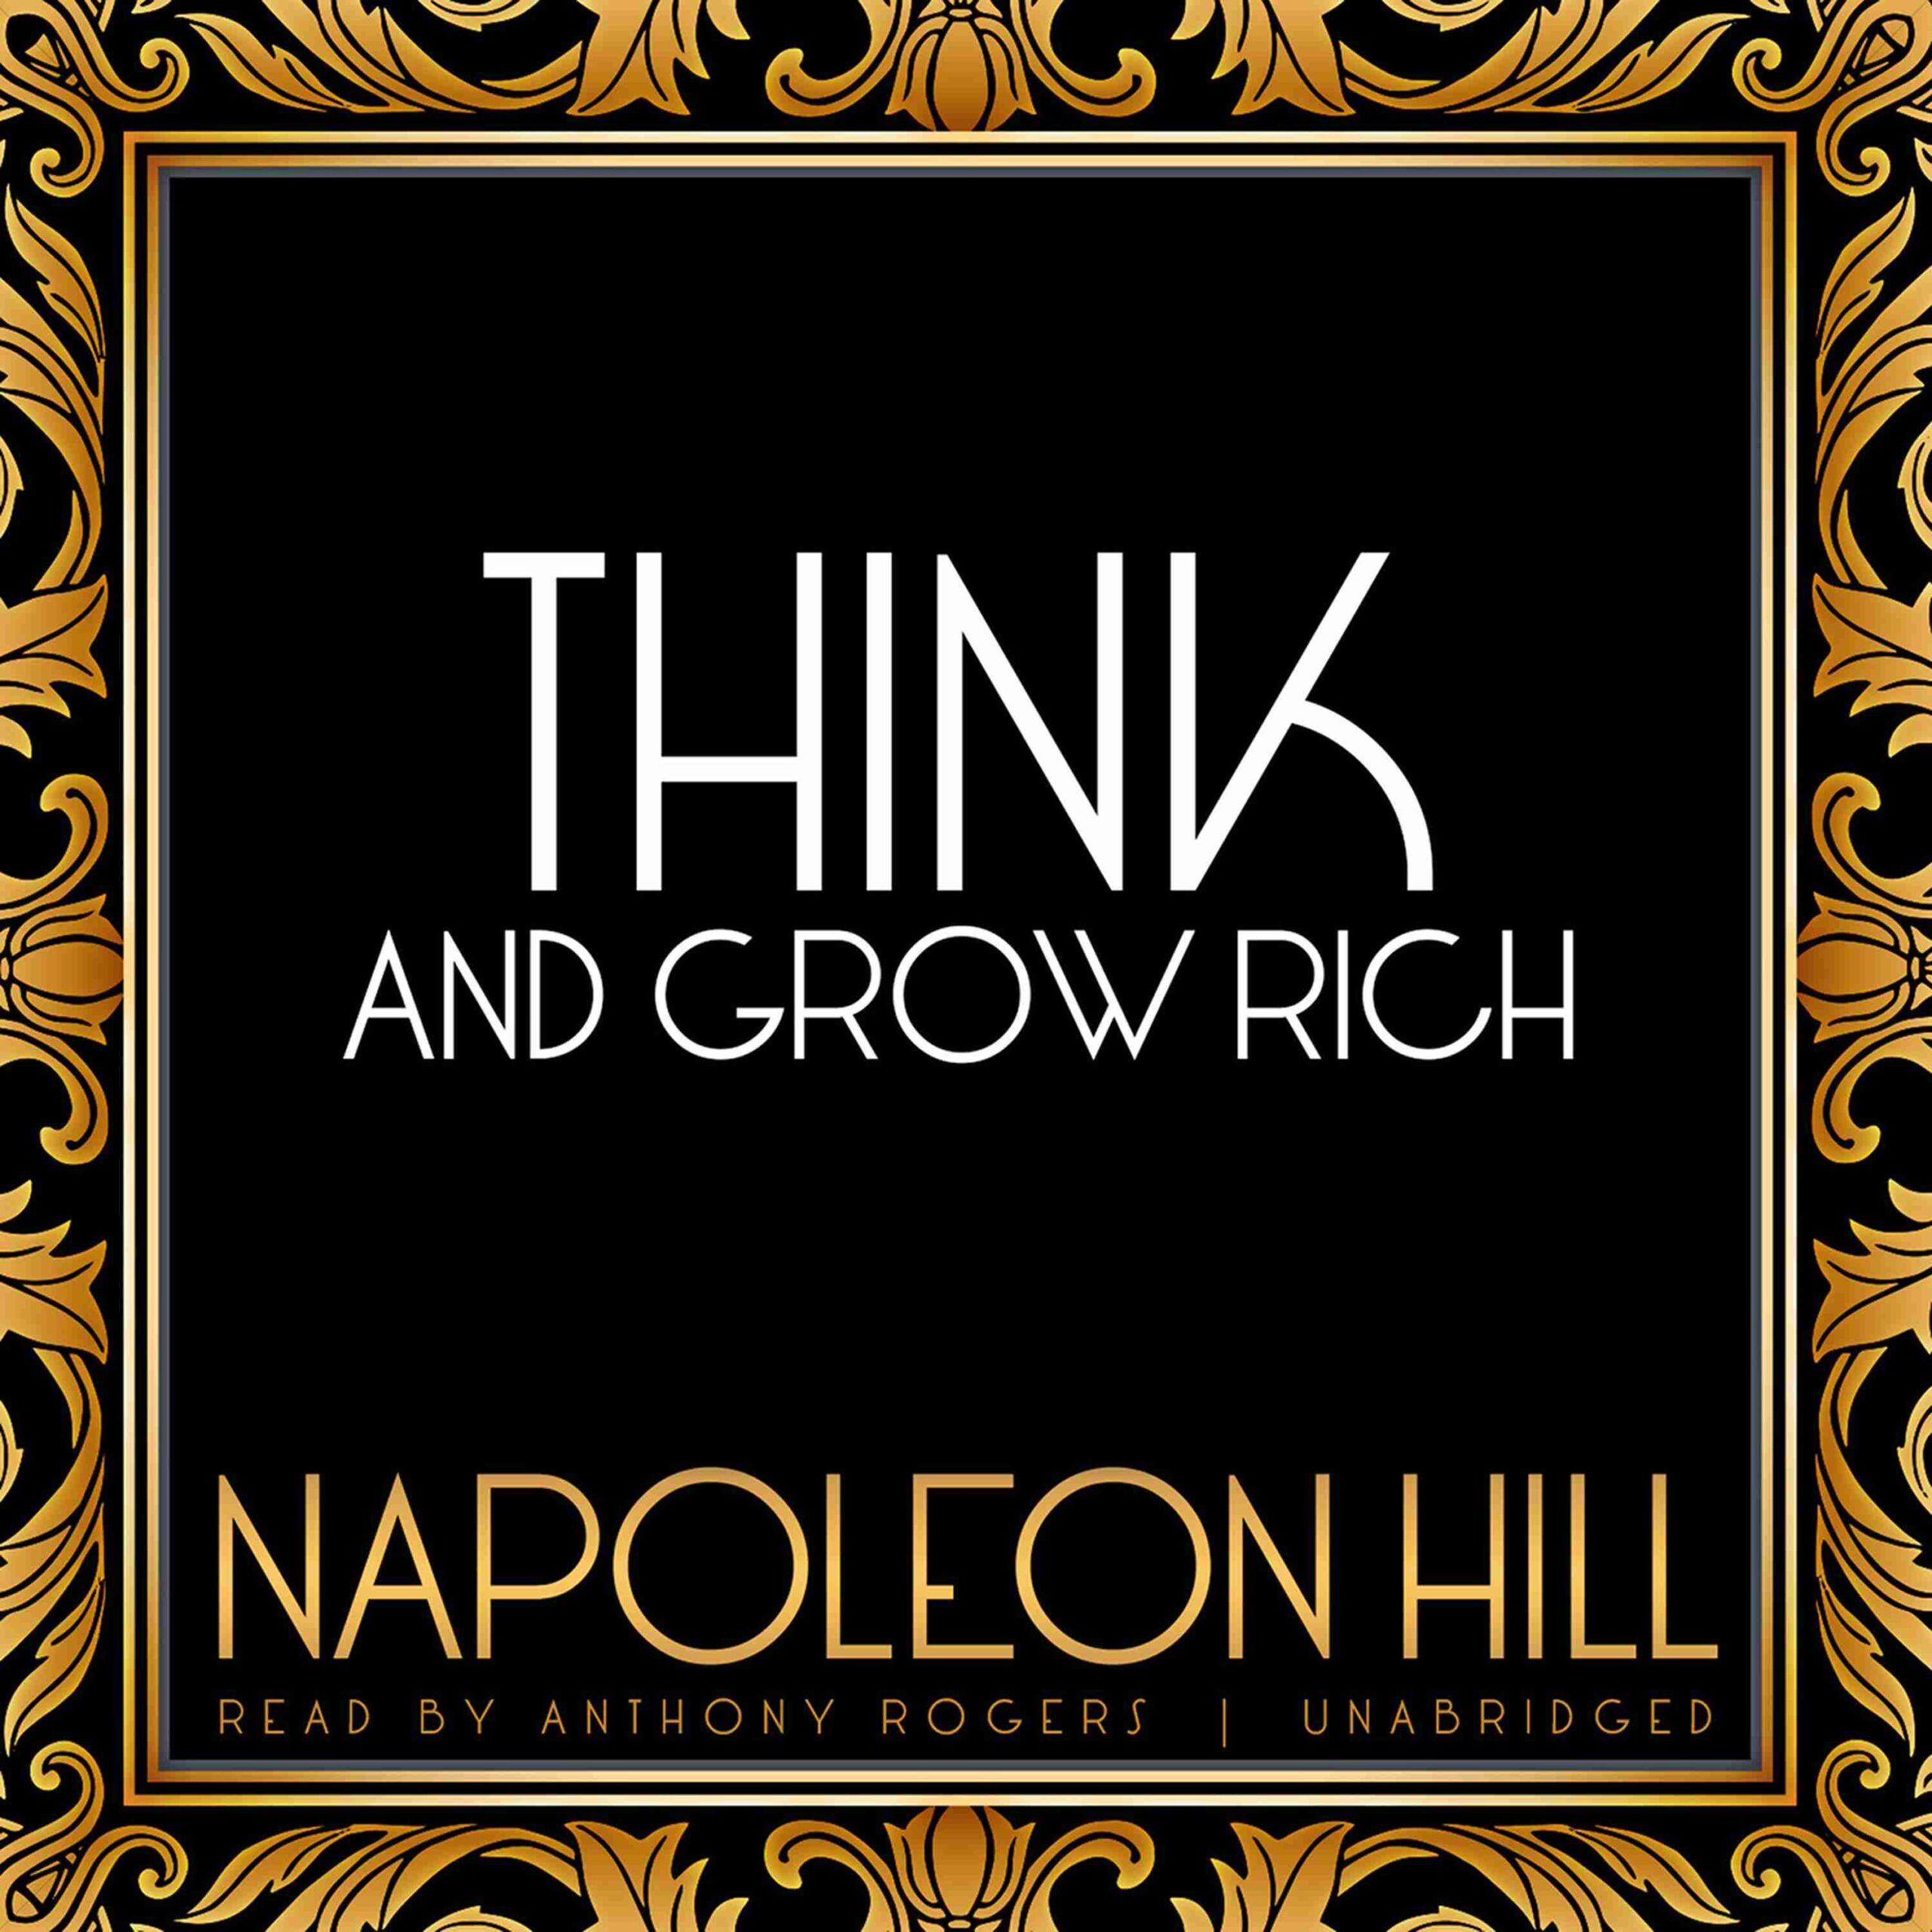 Think and Grow Rich byNapoleon Hill Audiobook. 19.95 USD